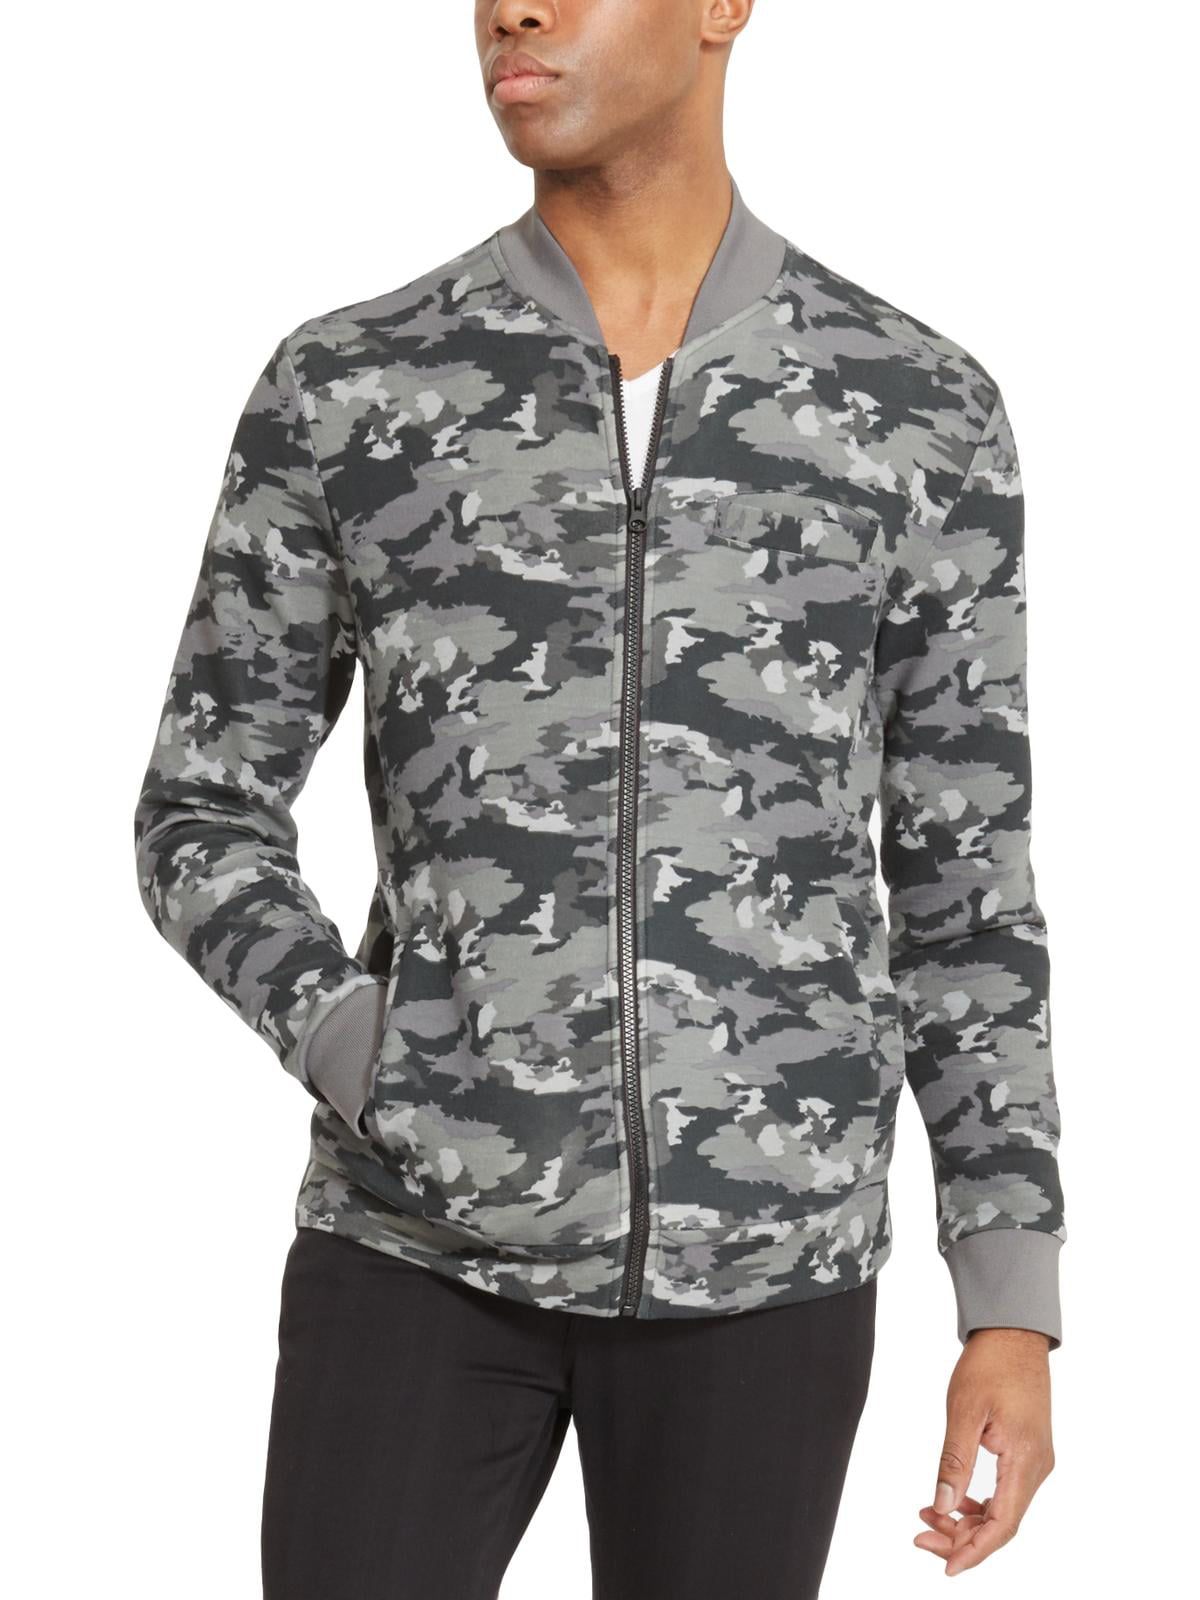 Kenneth Cole Reaction Mens Camouflage Long Sleeves Bomber Jacket Gray L ...